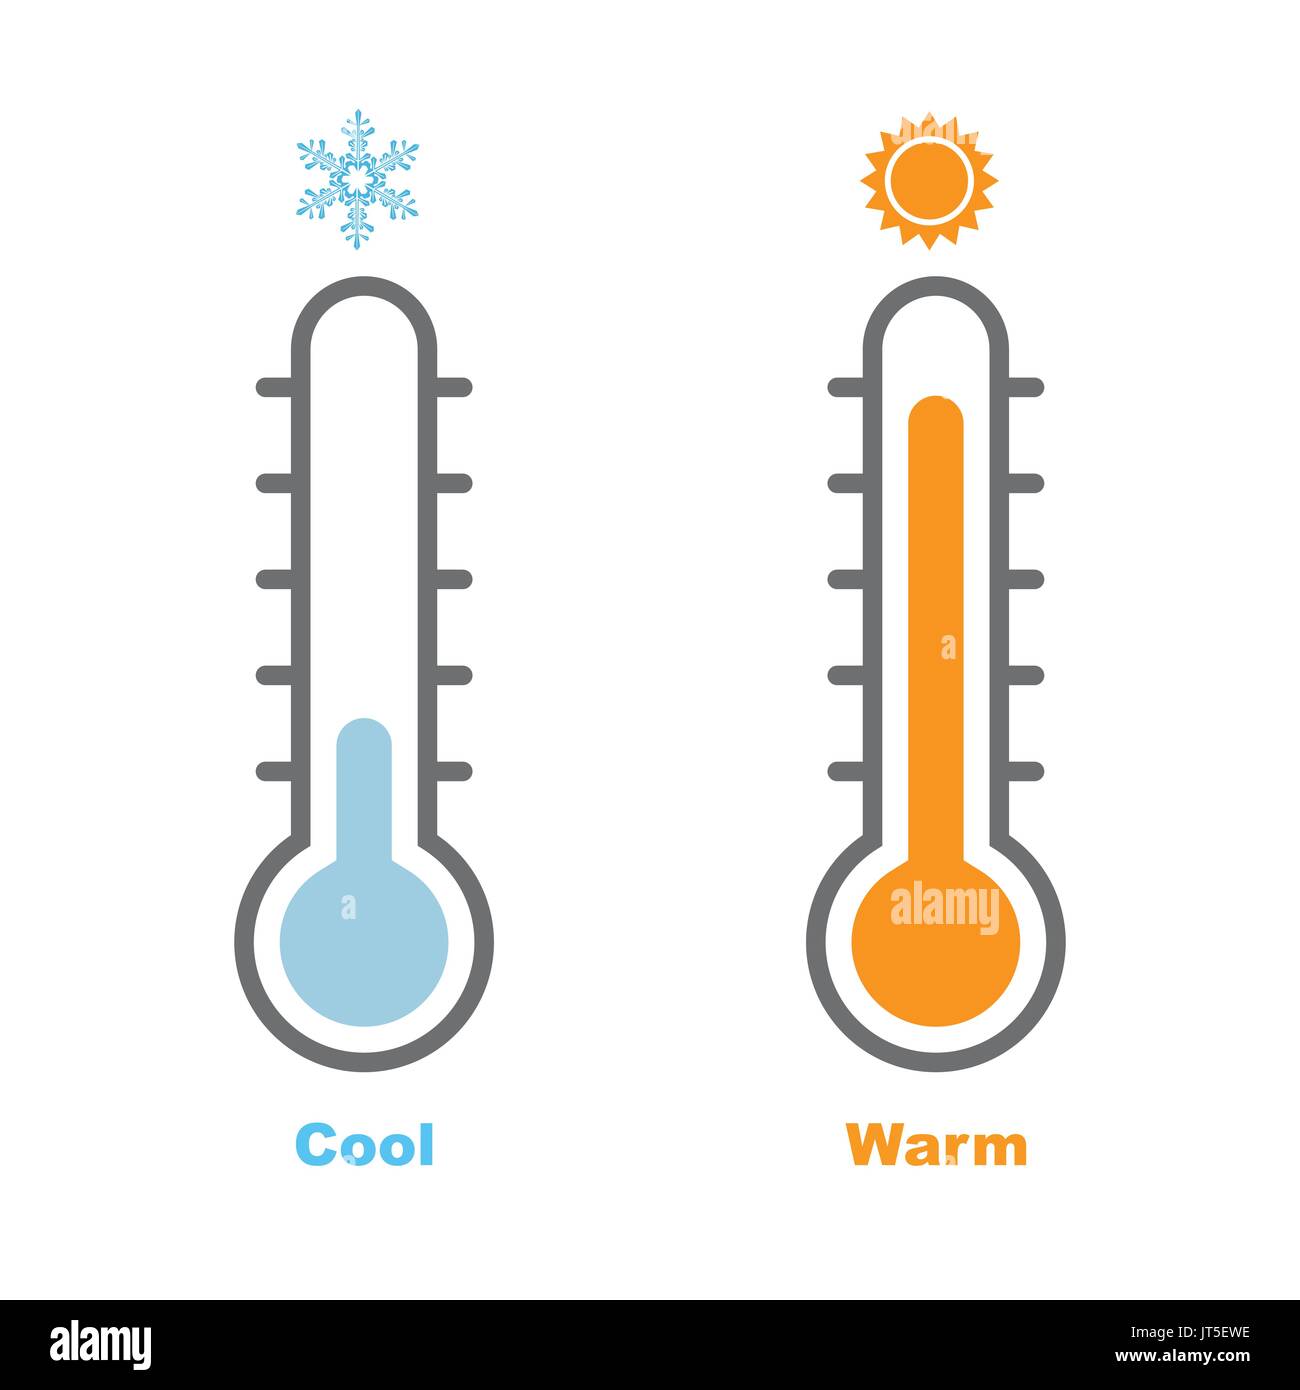 Vector Illustration of  Thermometer with warm and cool levels, flat style, EPS10. Stock Vector